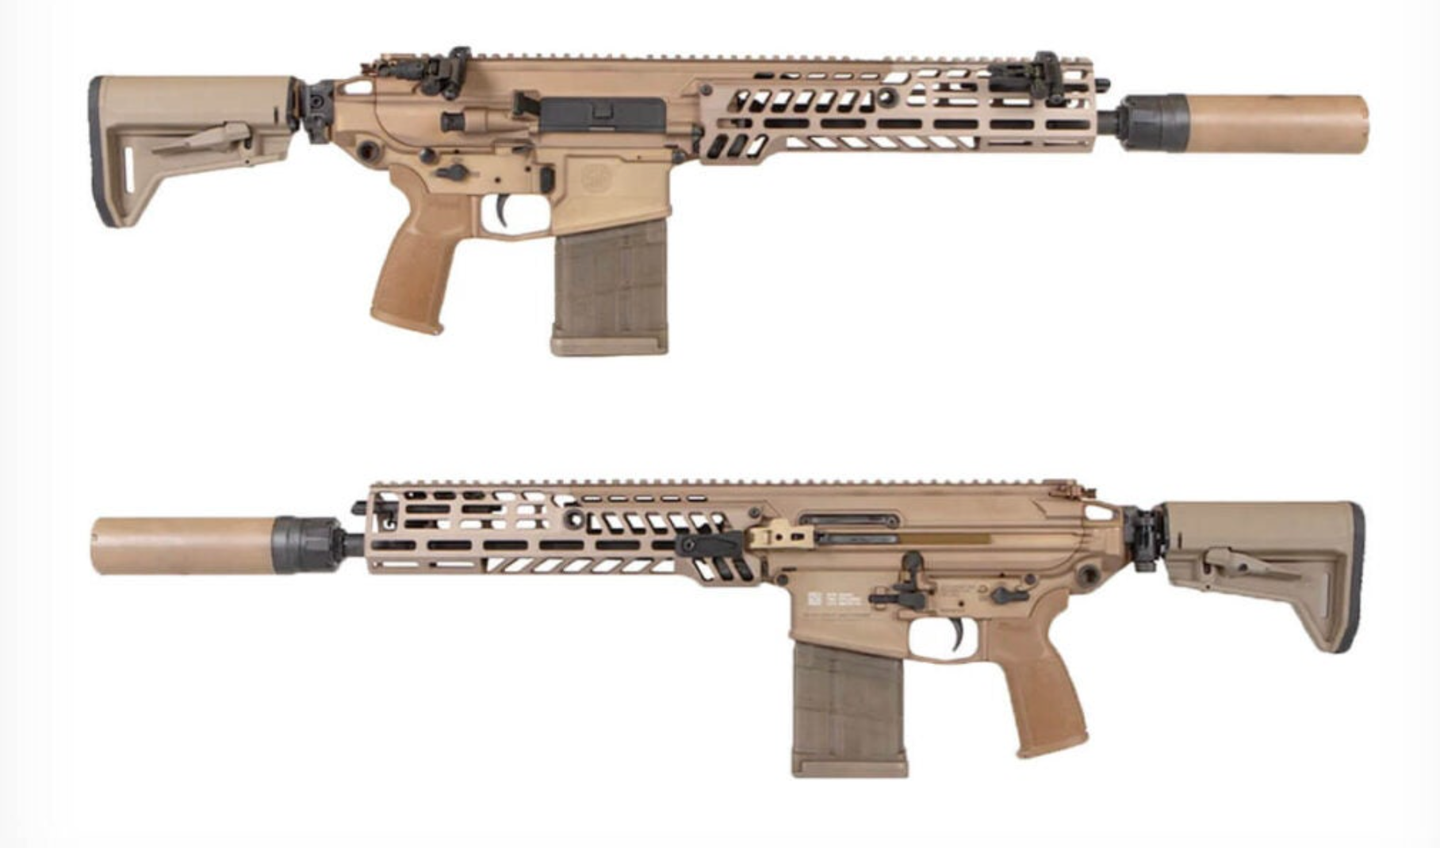 At $7,999, the MCX Spear is only for the serious collectors and enthusiasts (SIG Sauer)